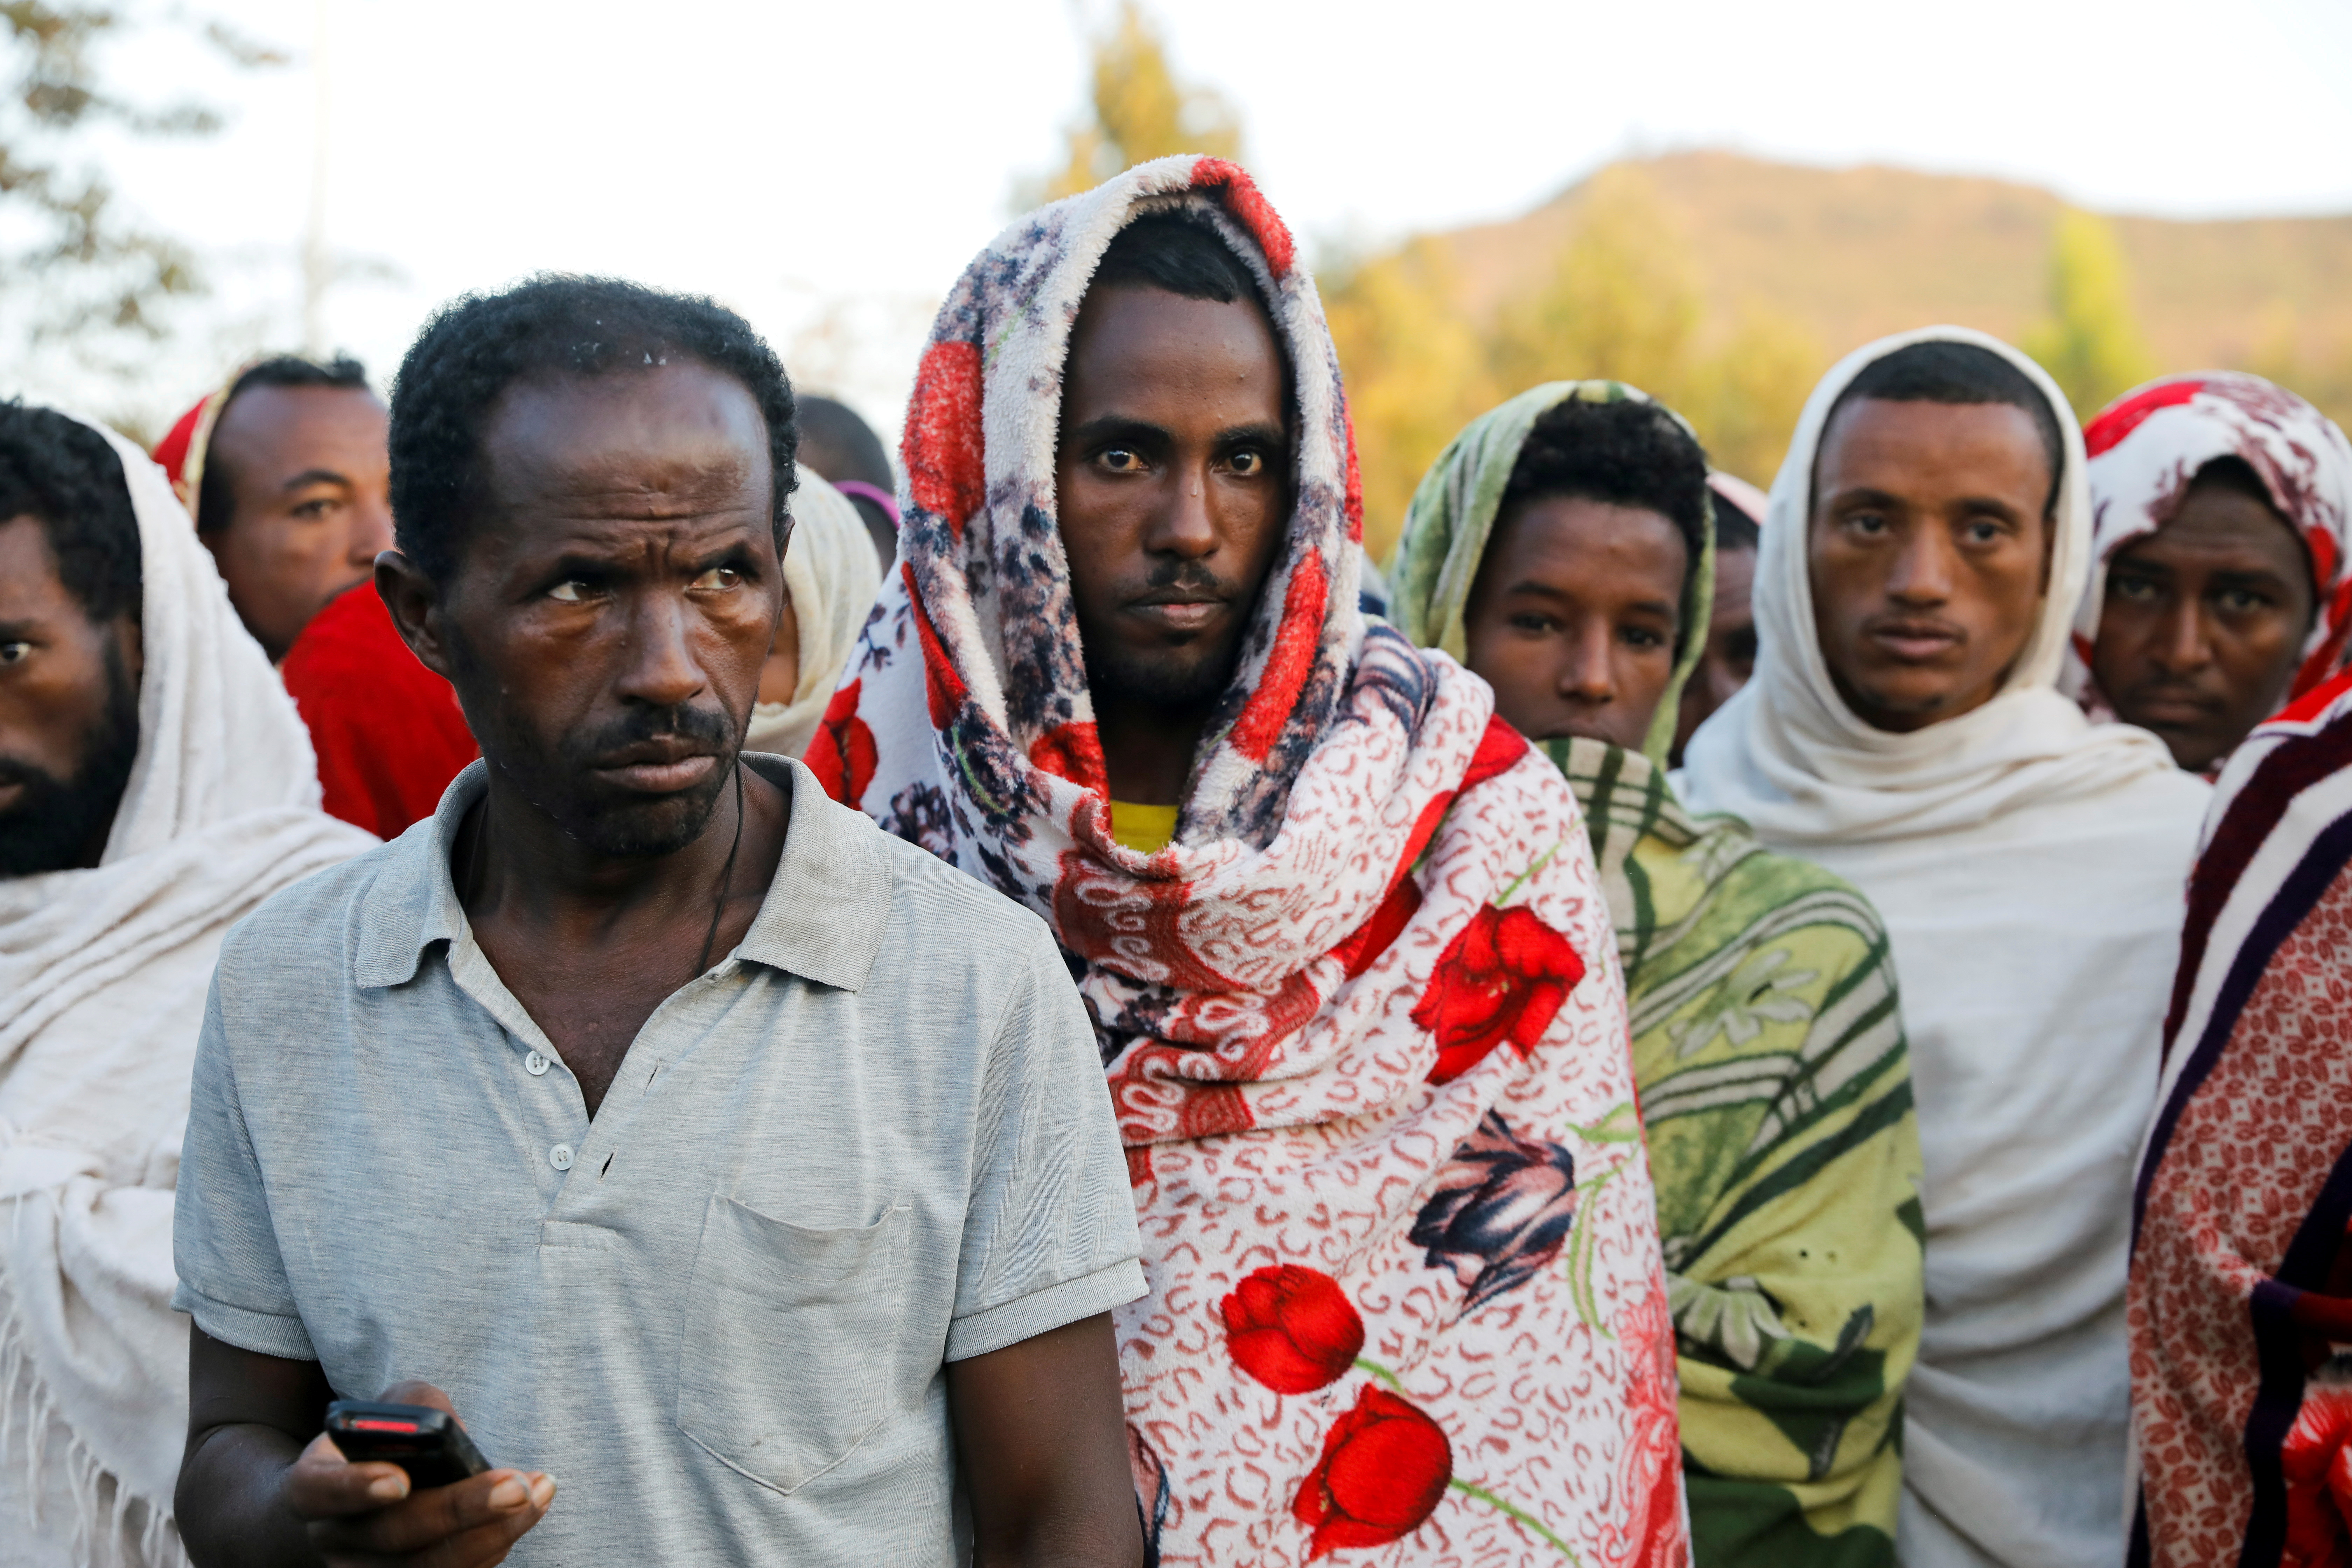 Men stand in line to receive food donations, at the Tsehaye primary school, in Shire